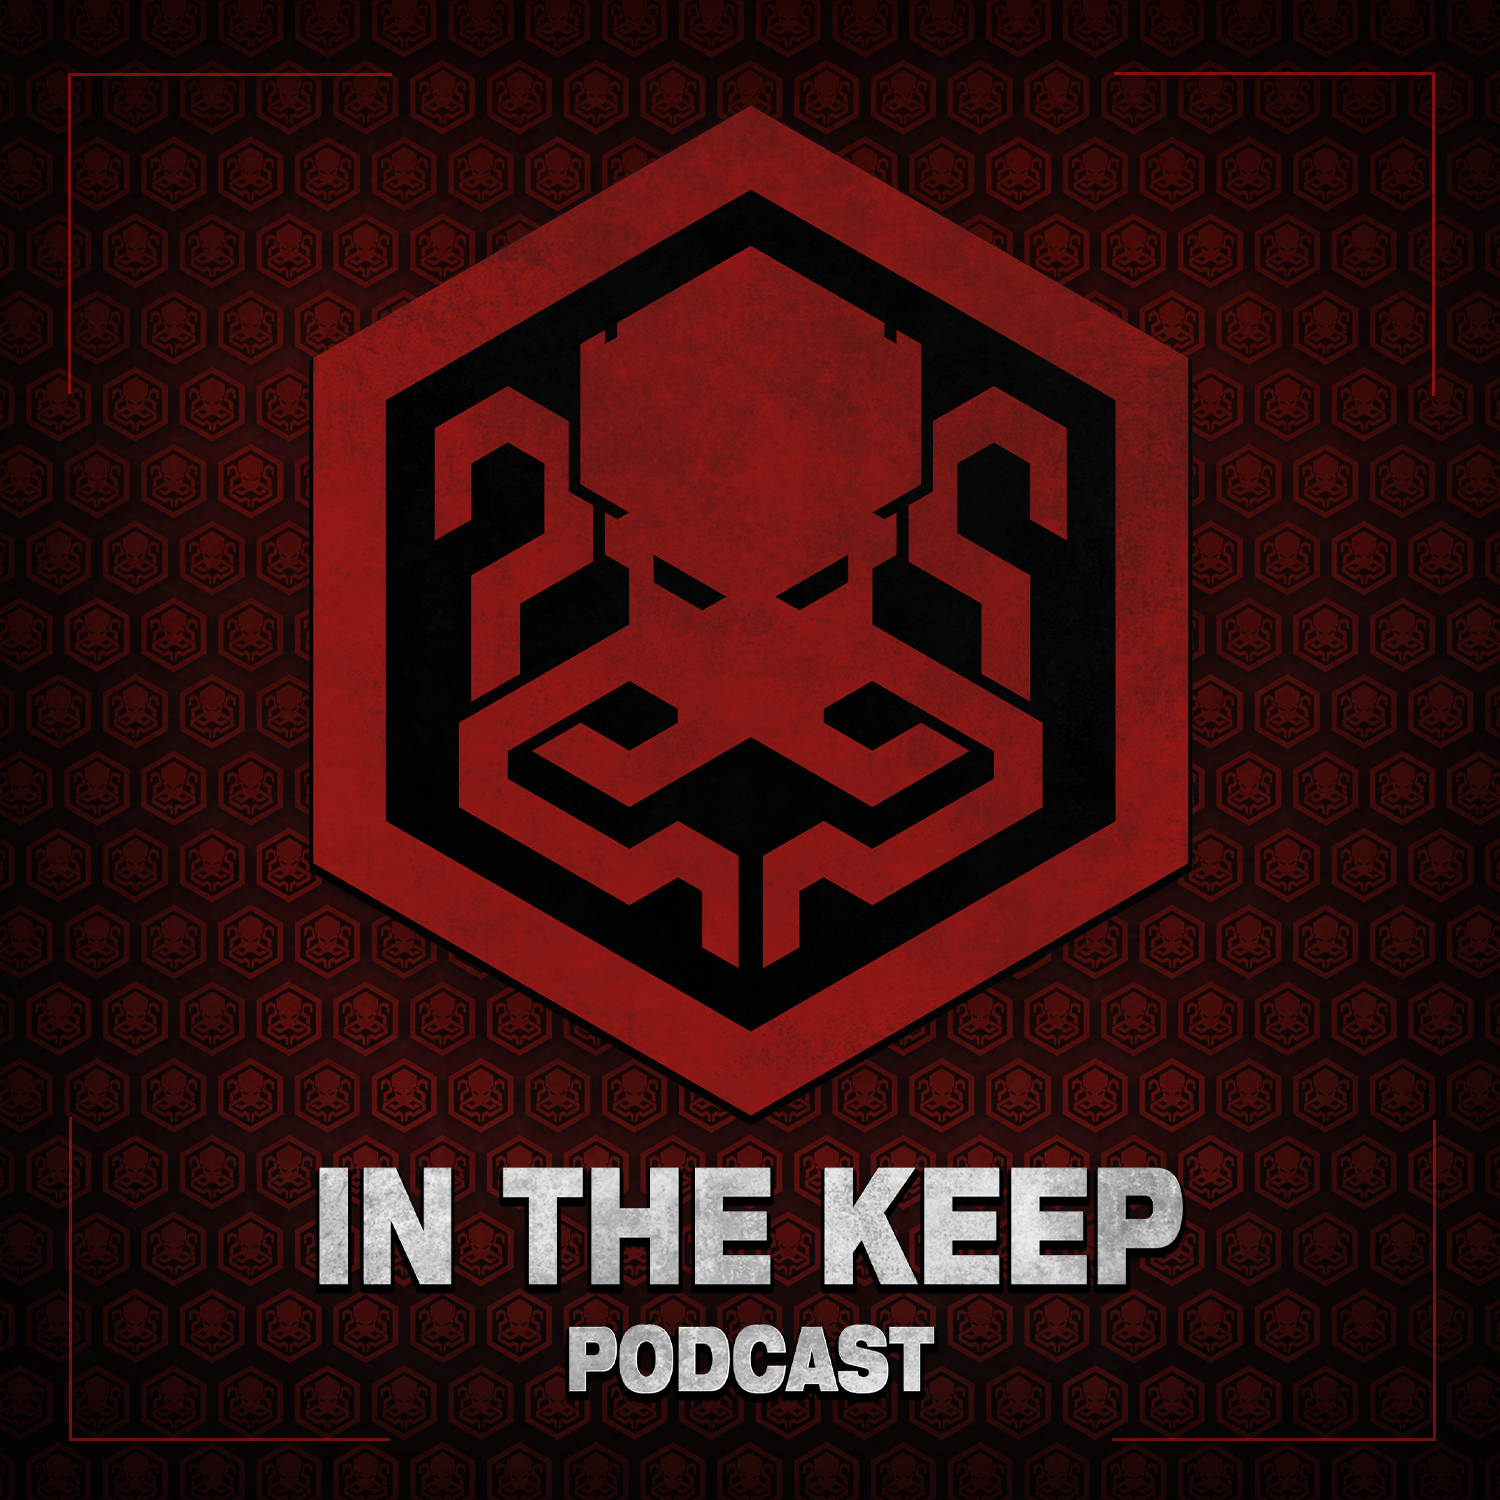 Field and Foley Podcast now featured on In The Keep